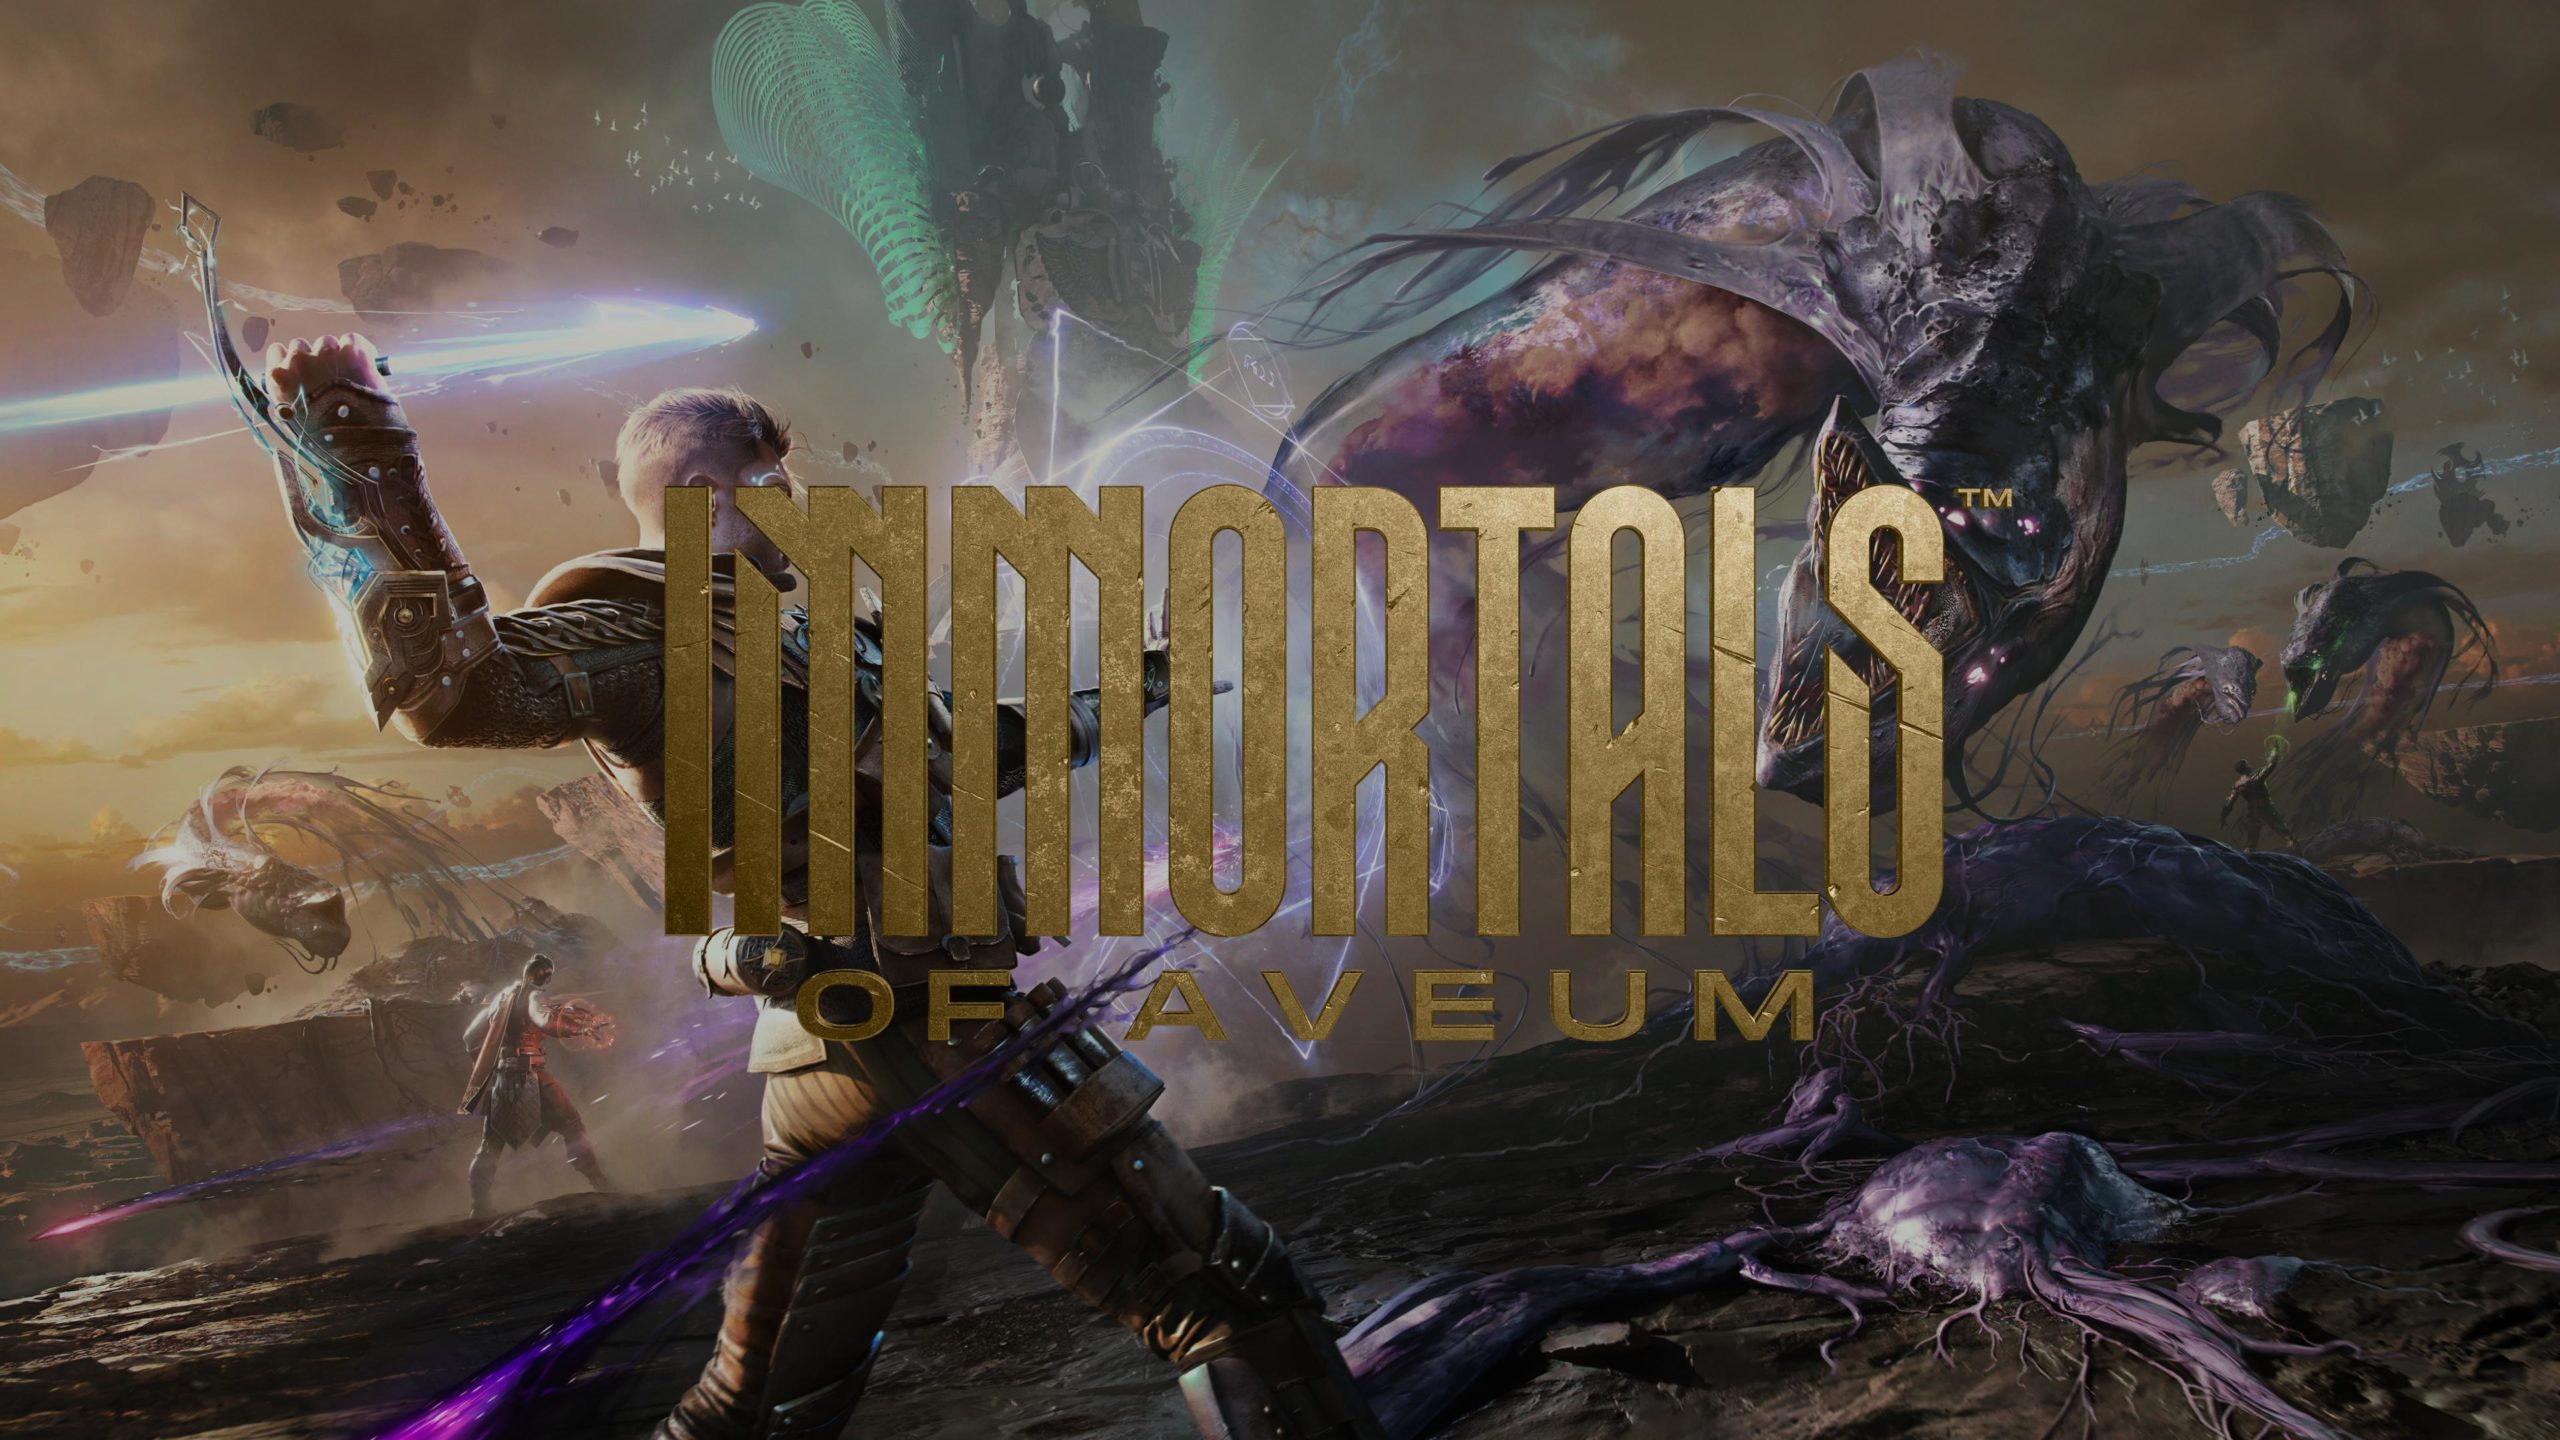 Immortals of Aveum Review — A Uniquely Magical Game